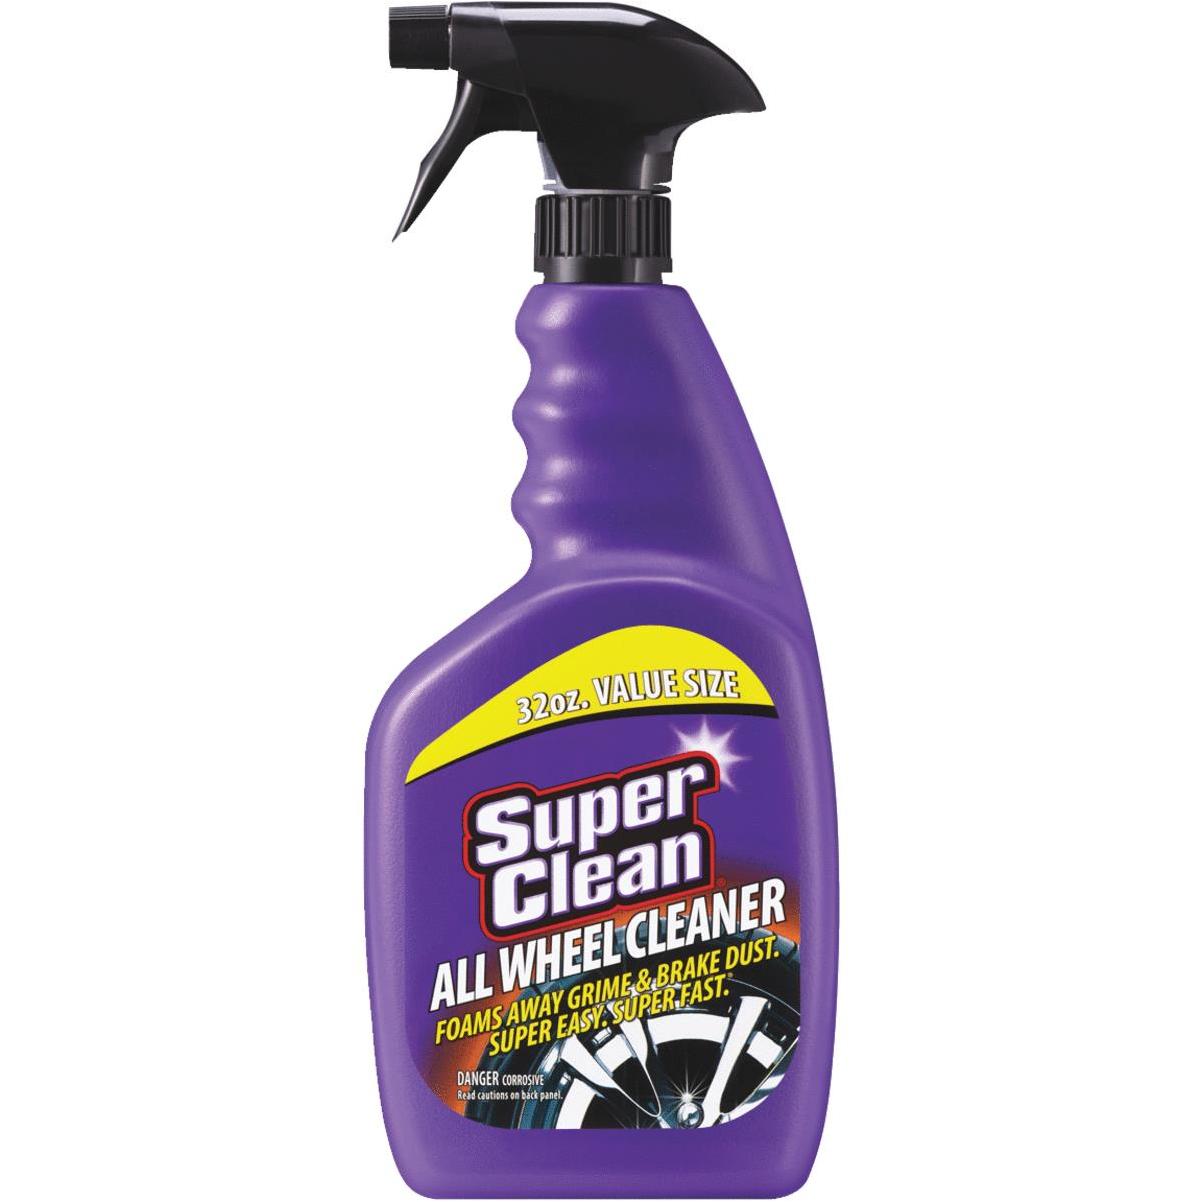 SuperClean® Cleaner-Degreaser is a concentrated, biodegradable